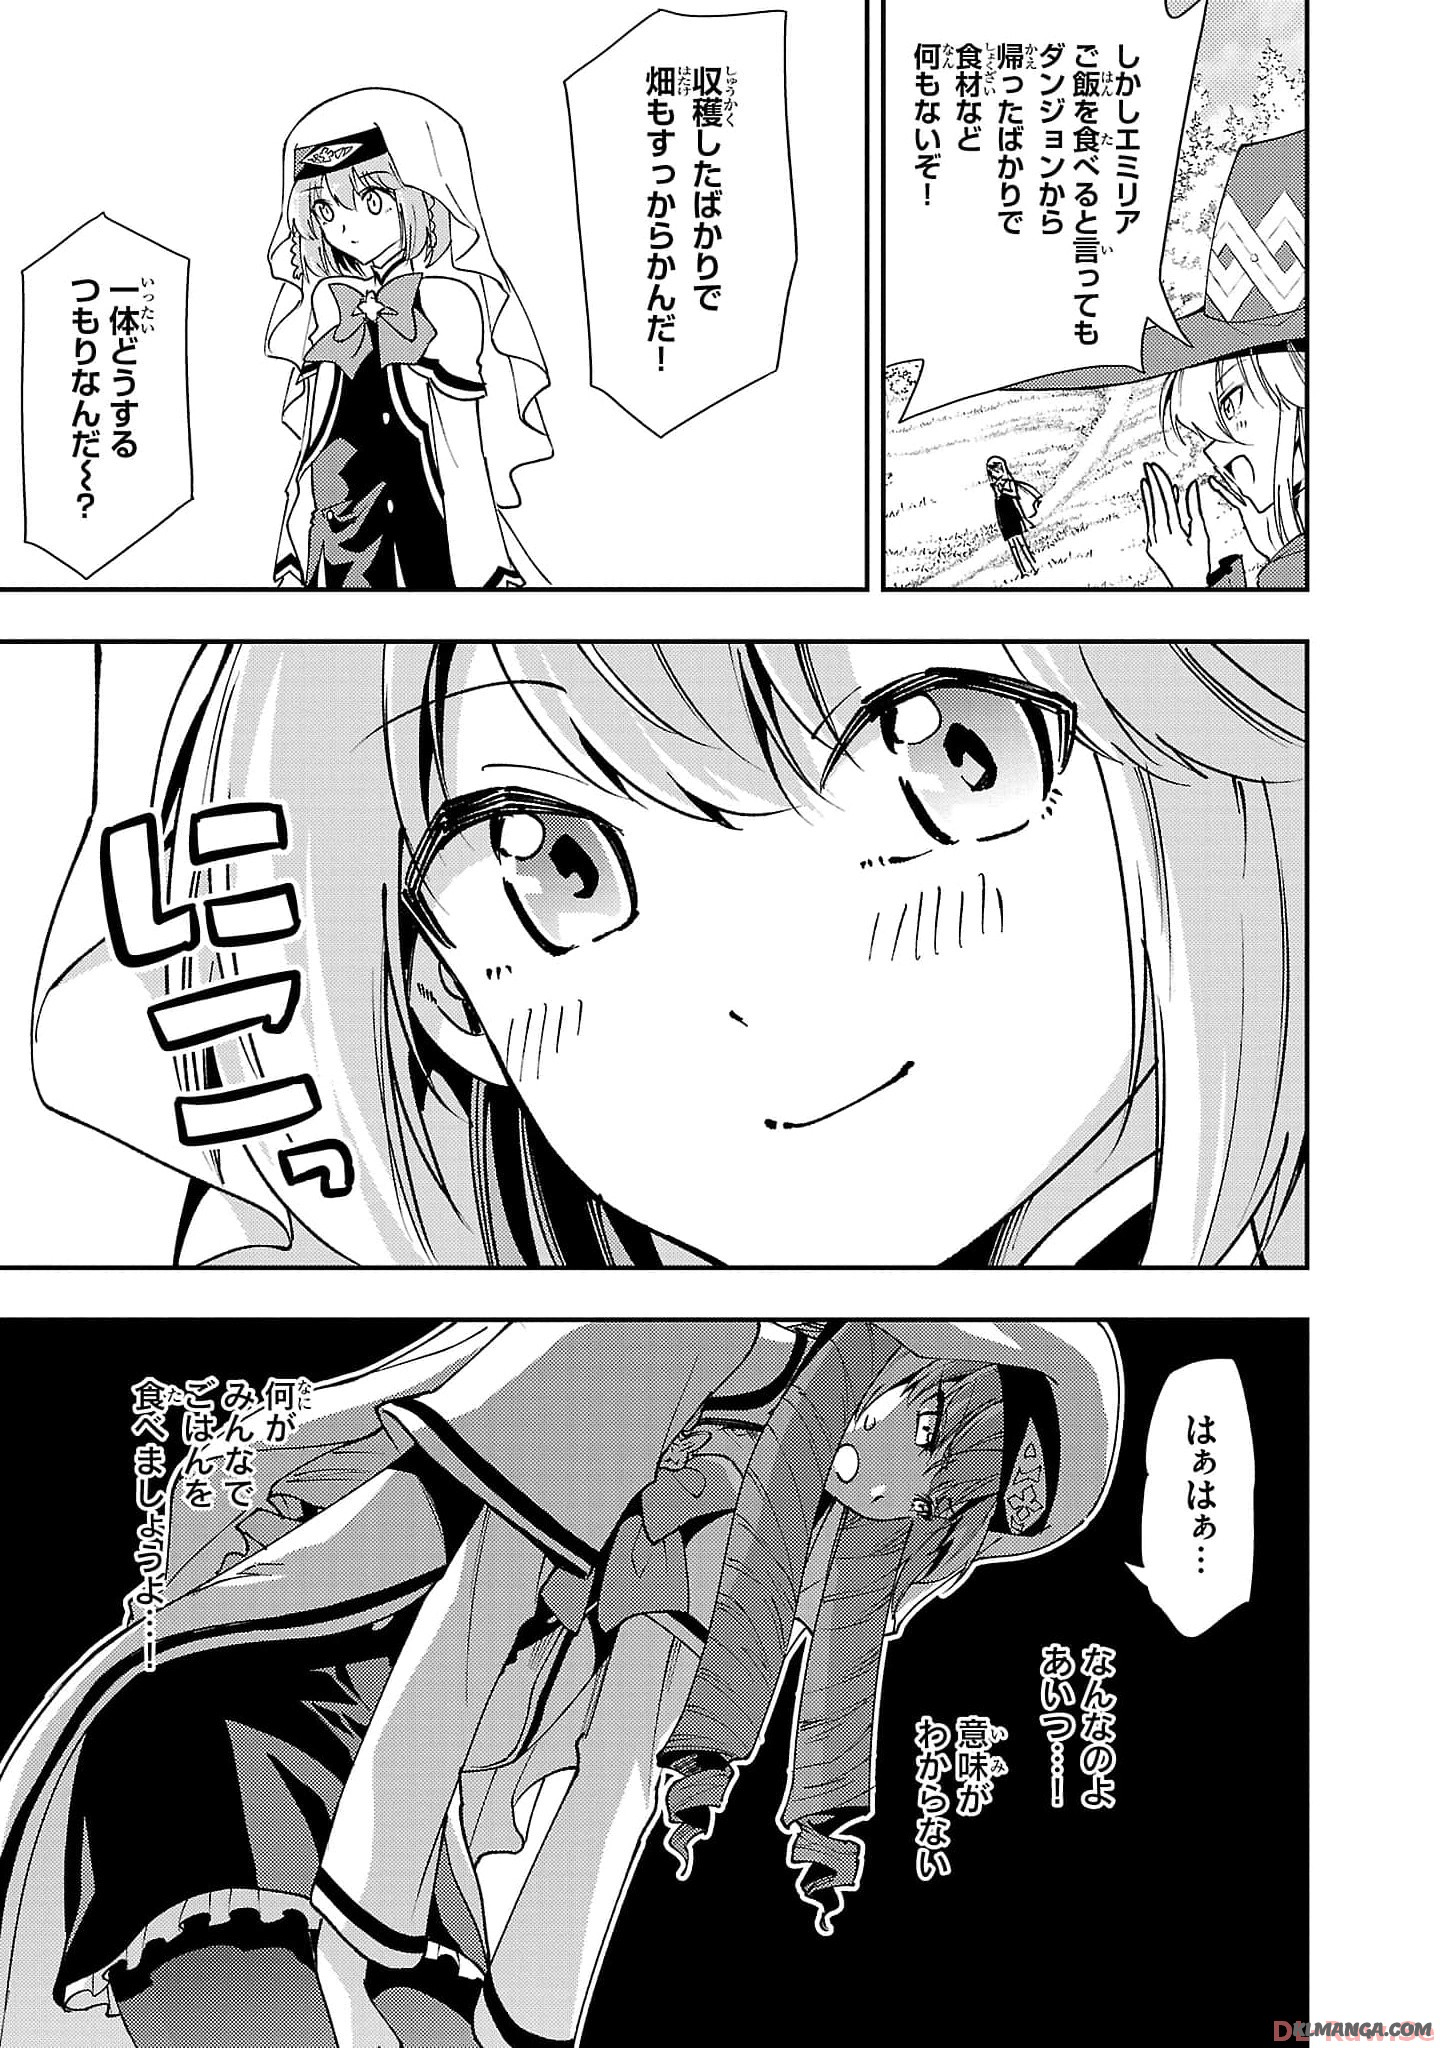 Hungry Saint and Full-Stomach Witch's Slow Life in Another World! 腹ペコ聖女とまんぷく魔女の異世界スローライフ! 第22話 - Page 5